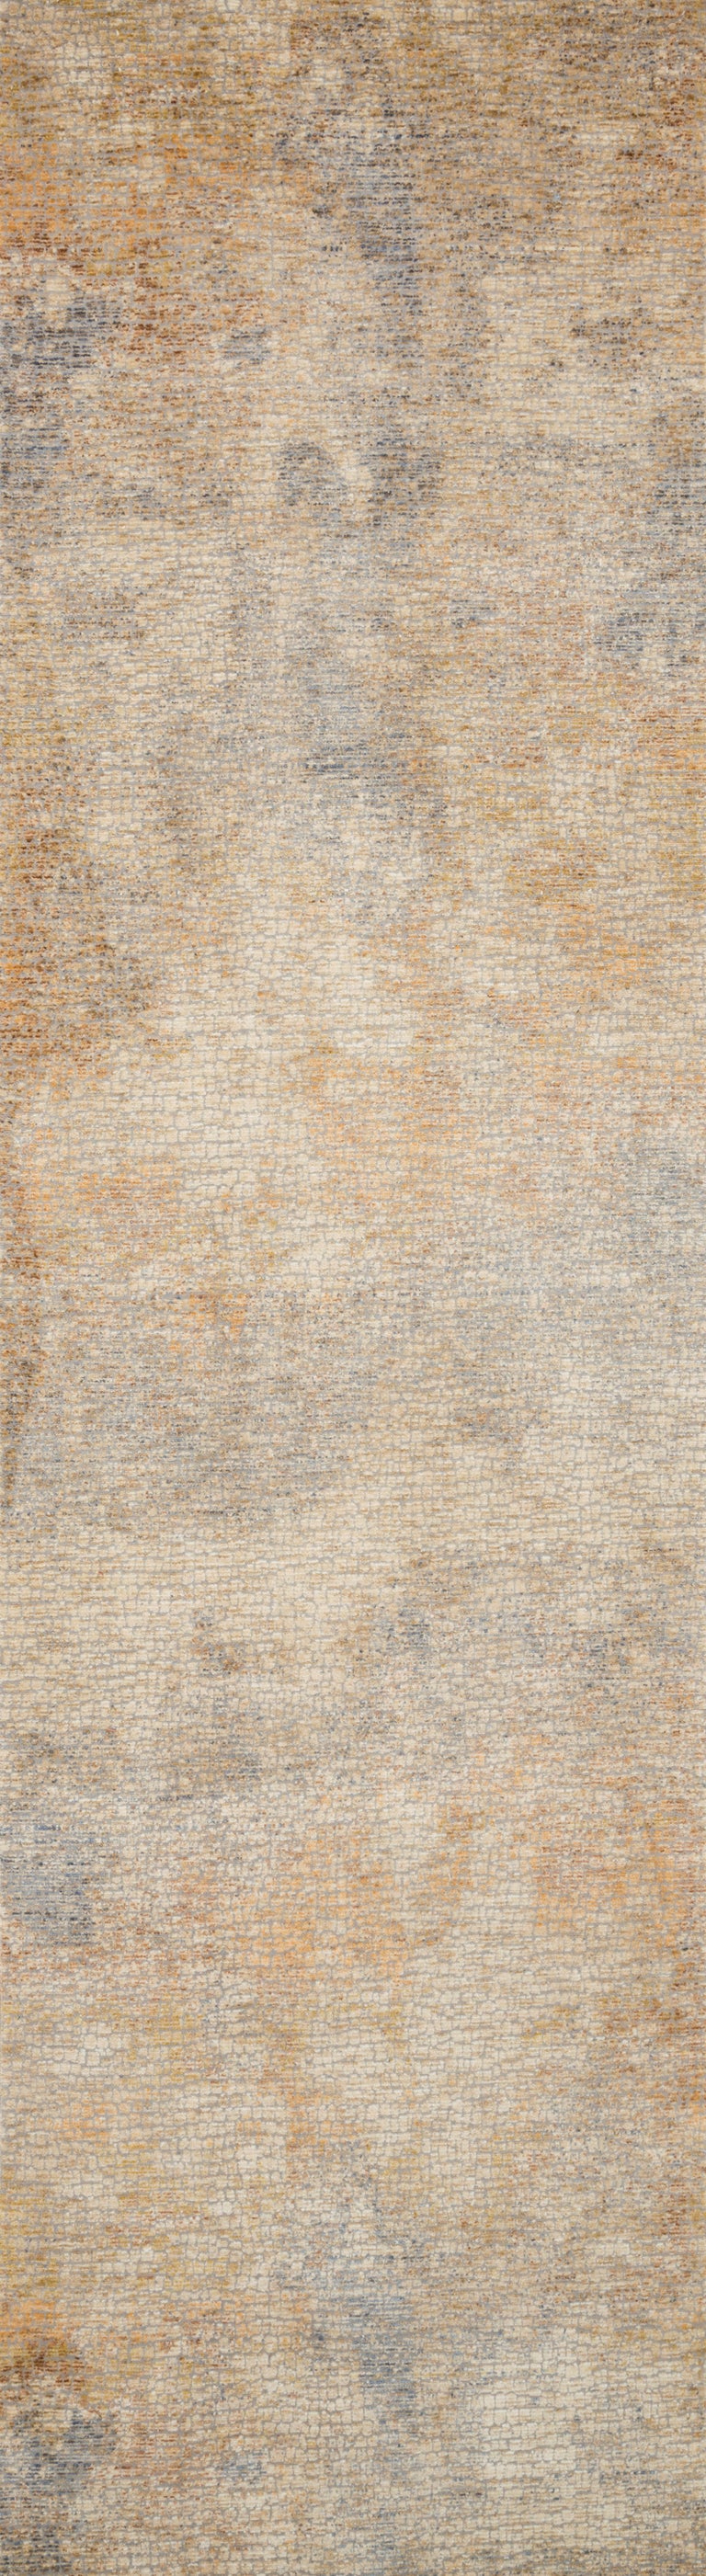 Loloi Rugs Porcia Collection Rug in Beige, Multi - 9'6" x 12'6"